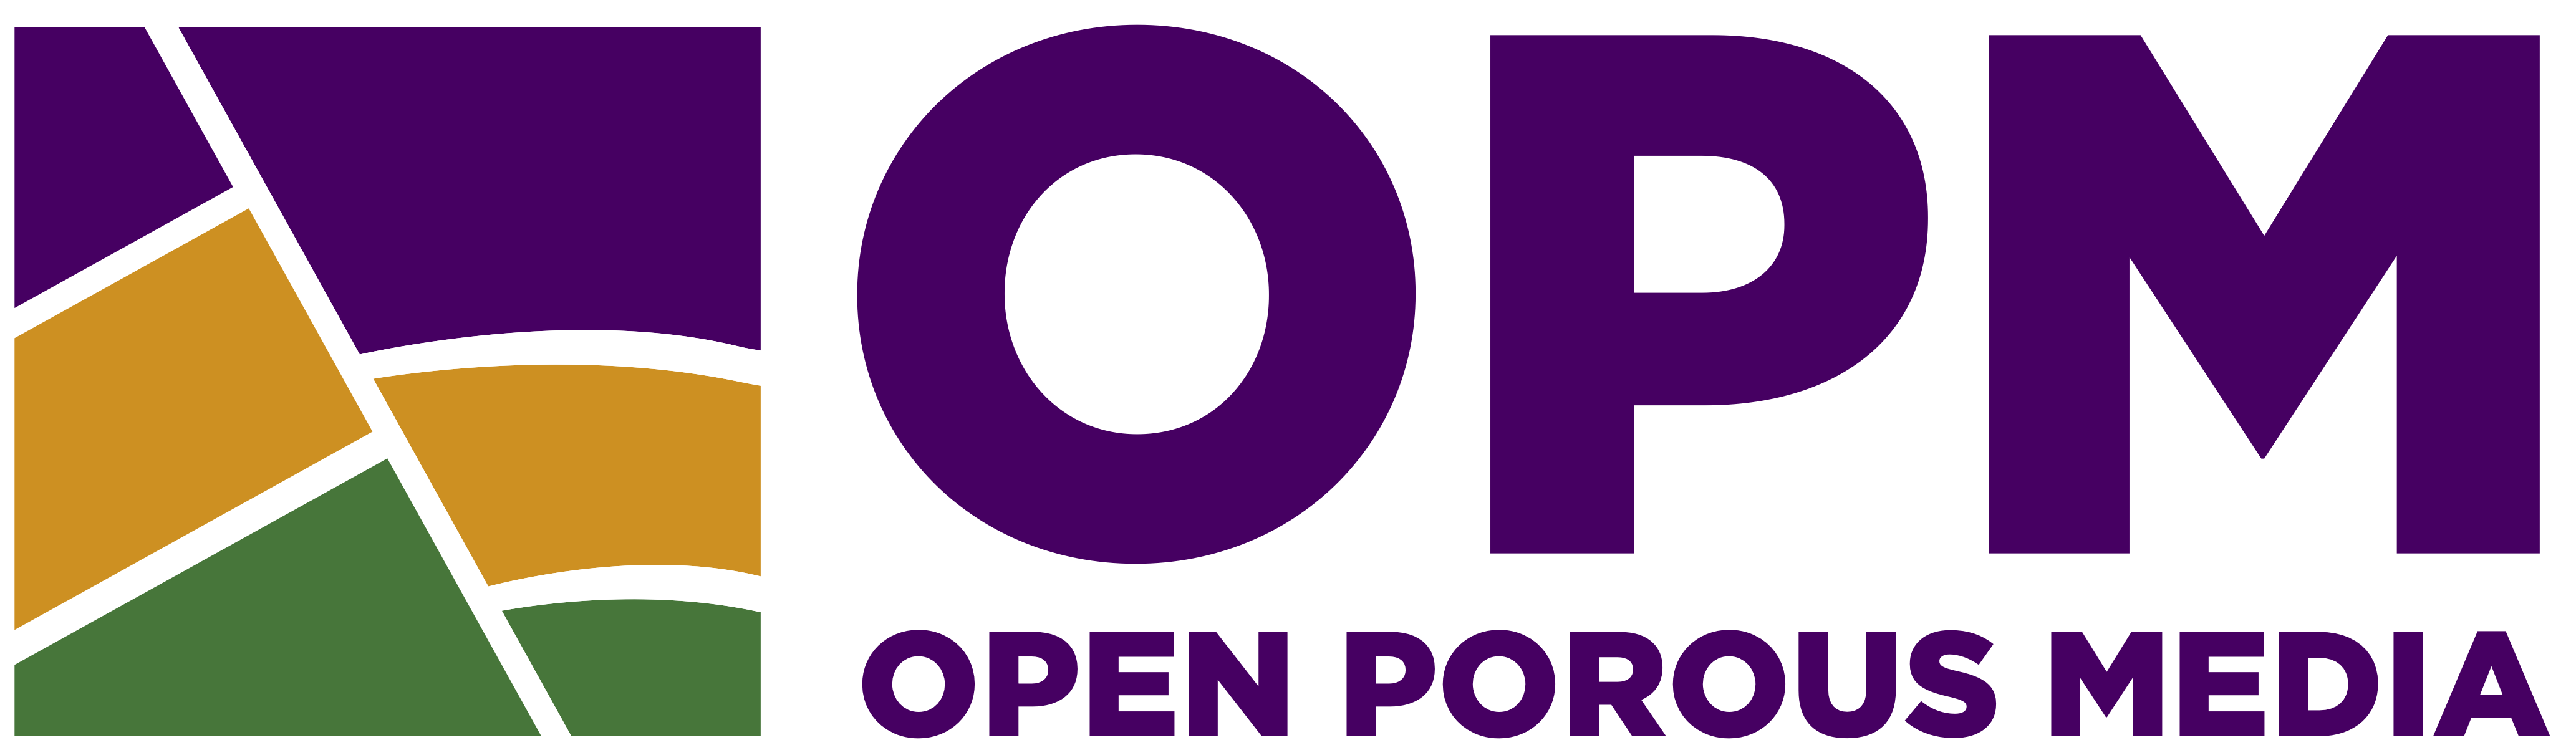 opm_logo_compact